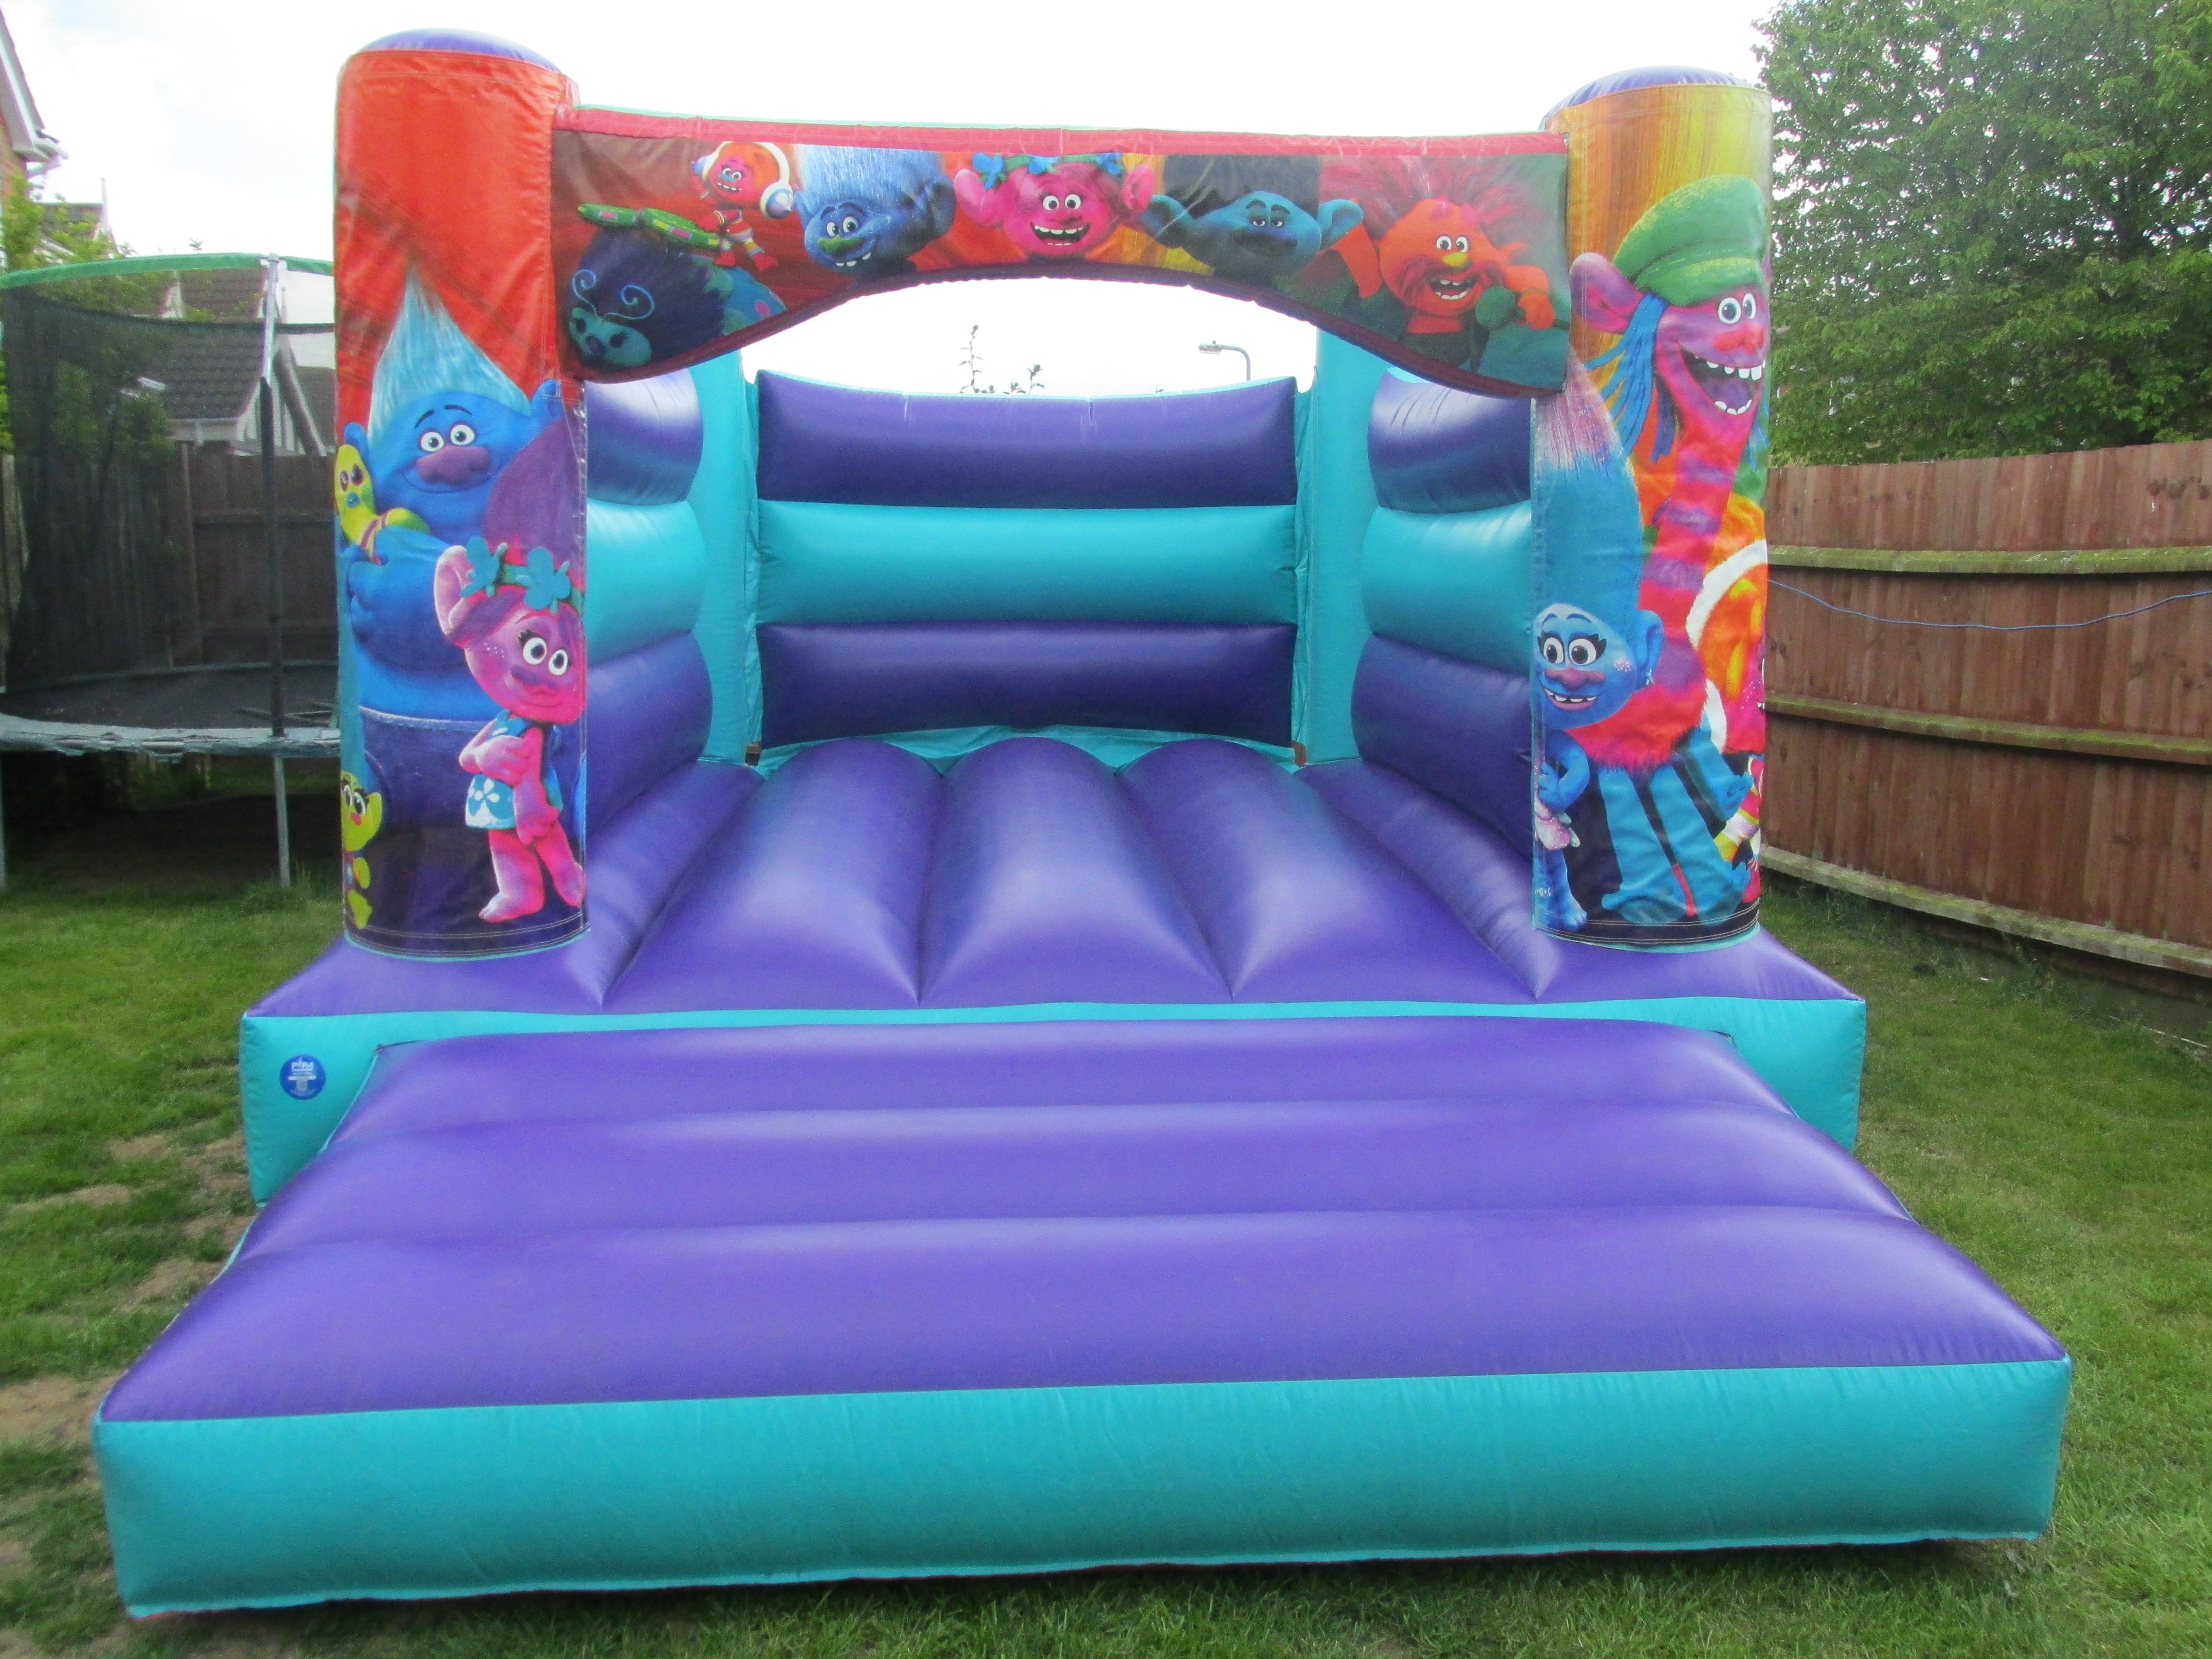 Colourful Trolls Bouncy Castle Hire In Peterborough, Bourne and Spalding